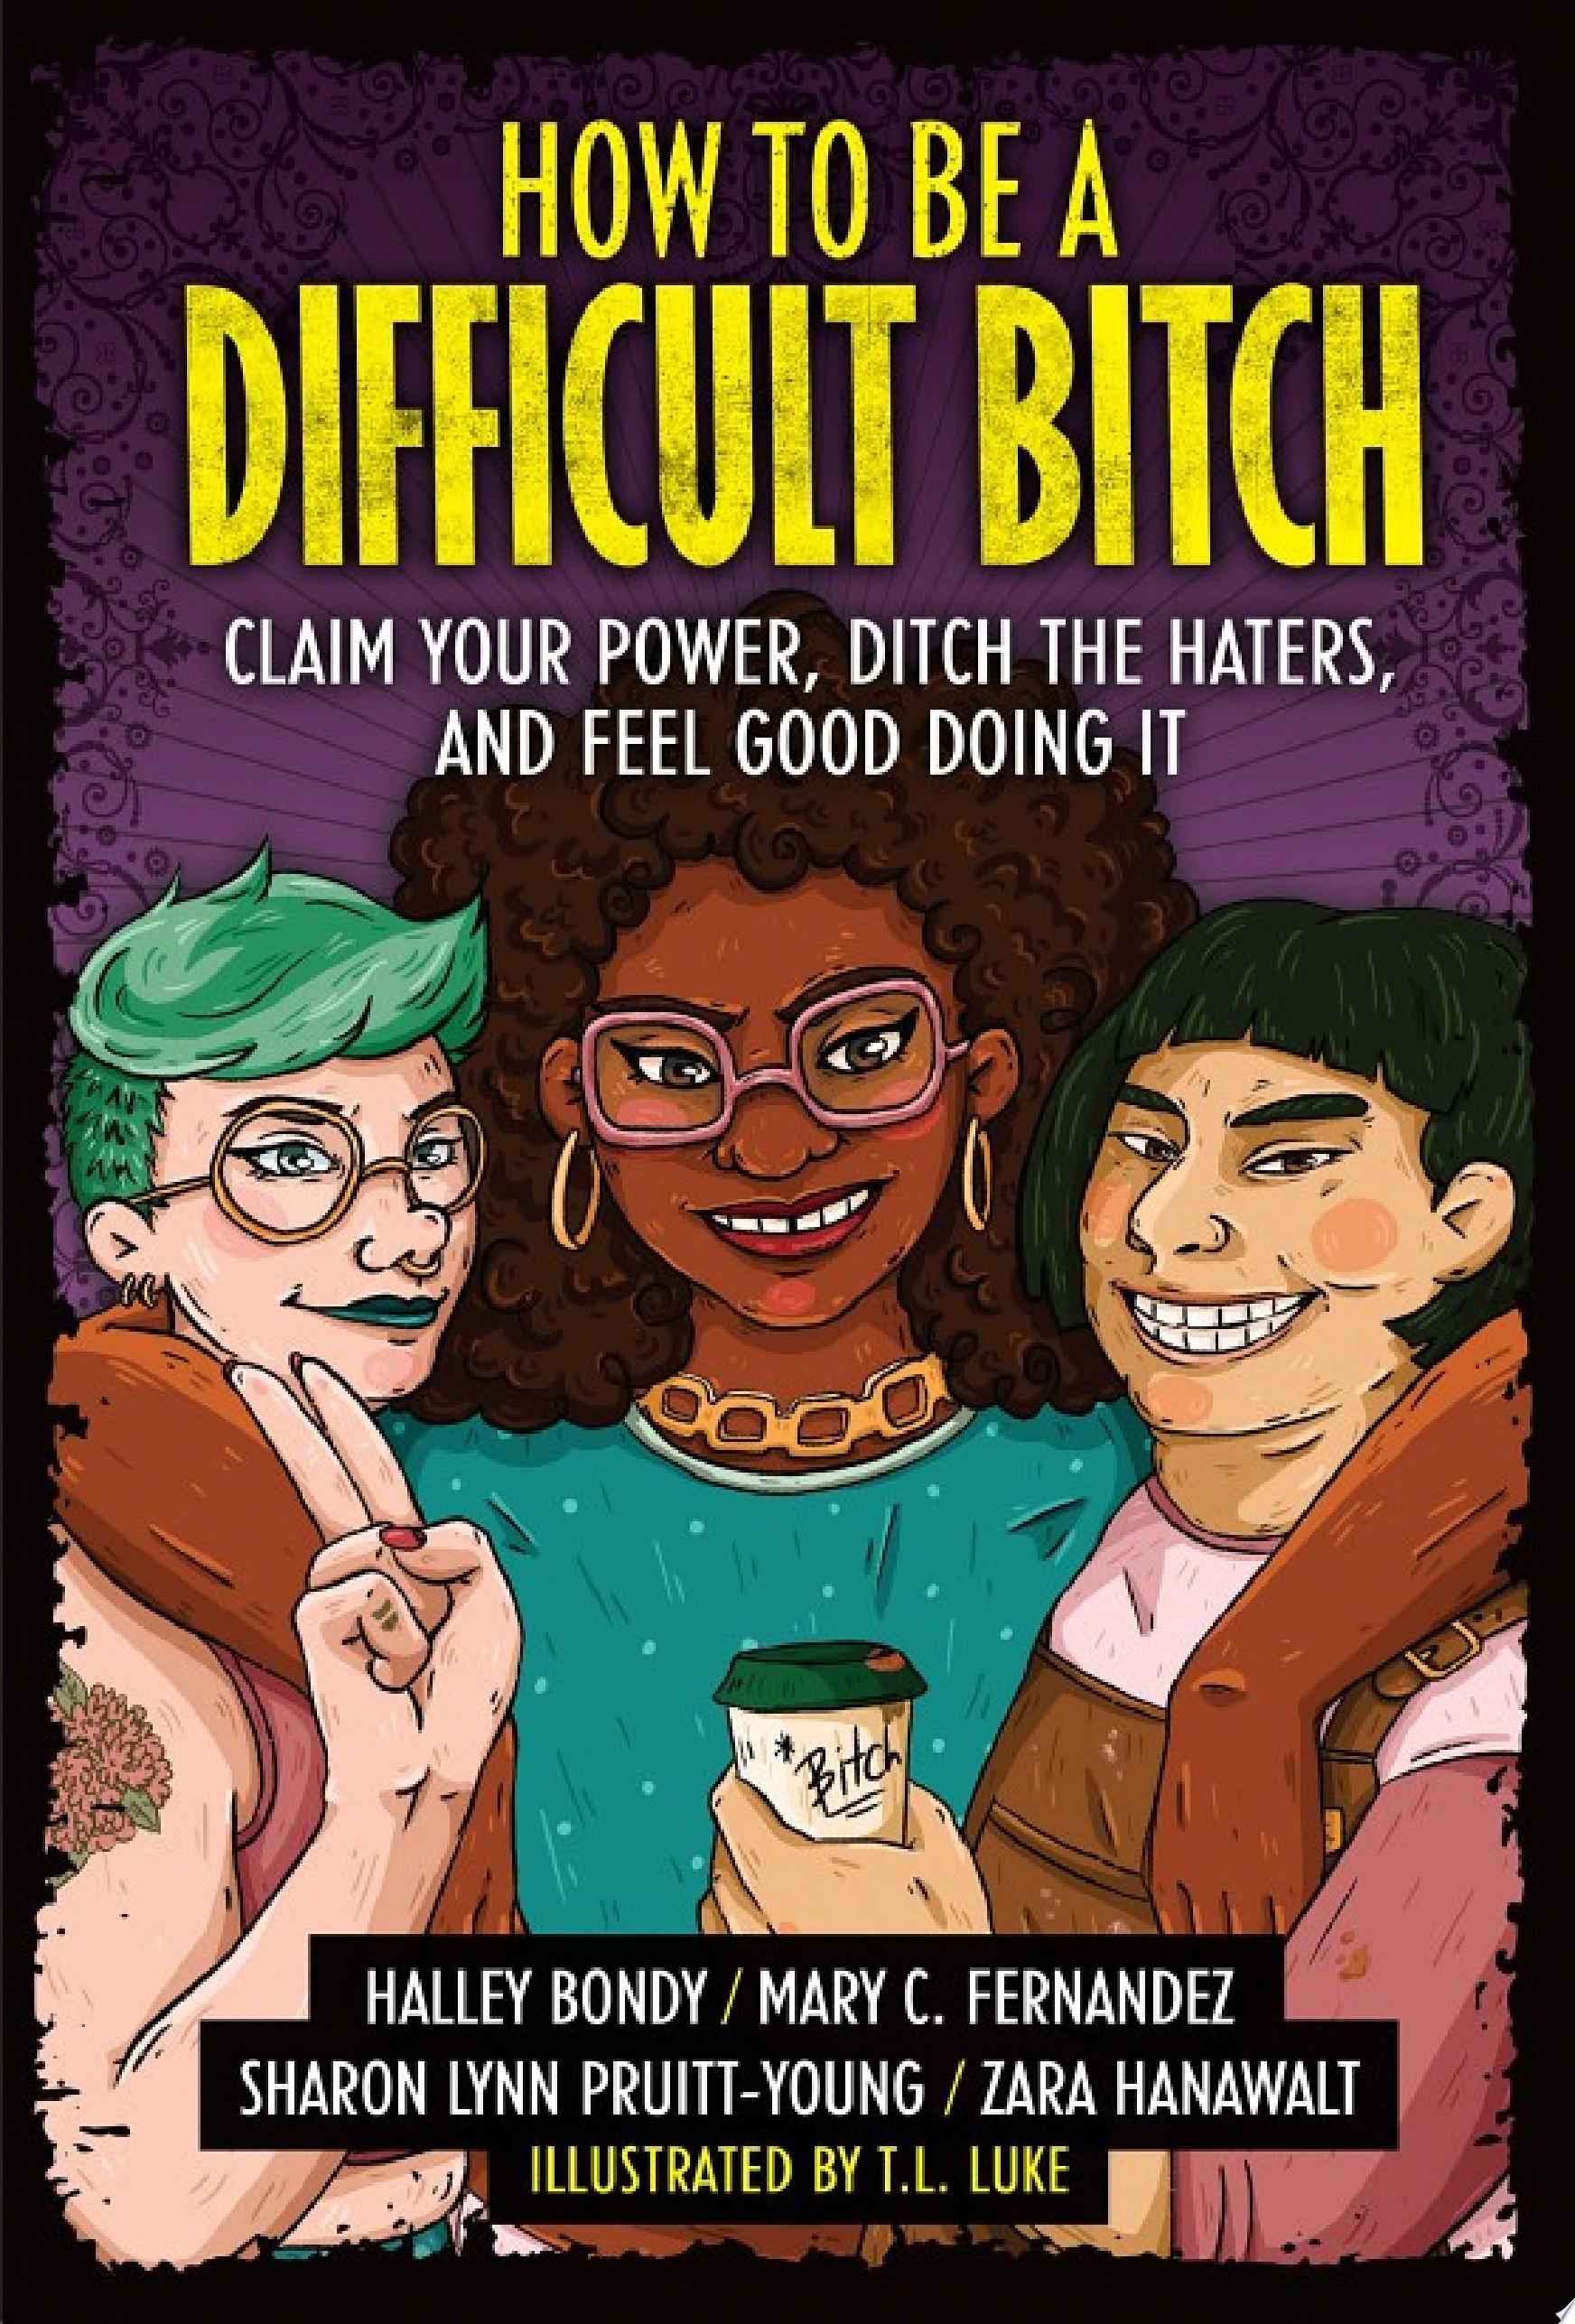 Image for "How to Be a Difficult Bitch"